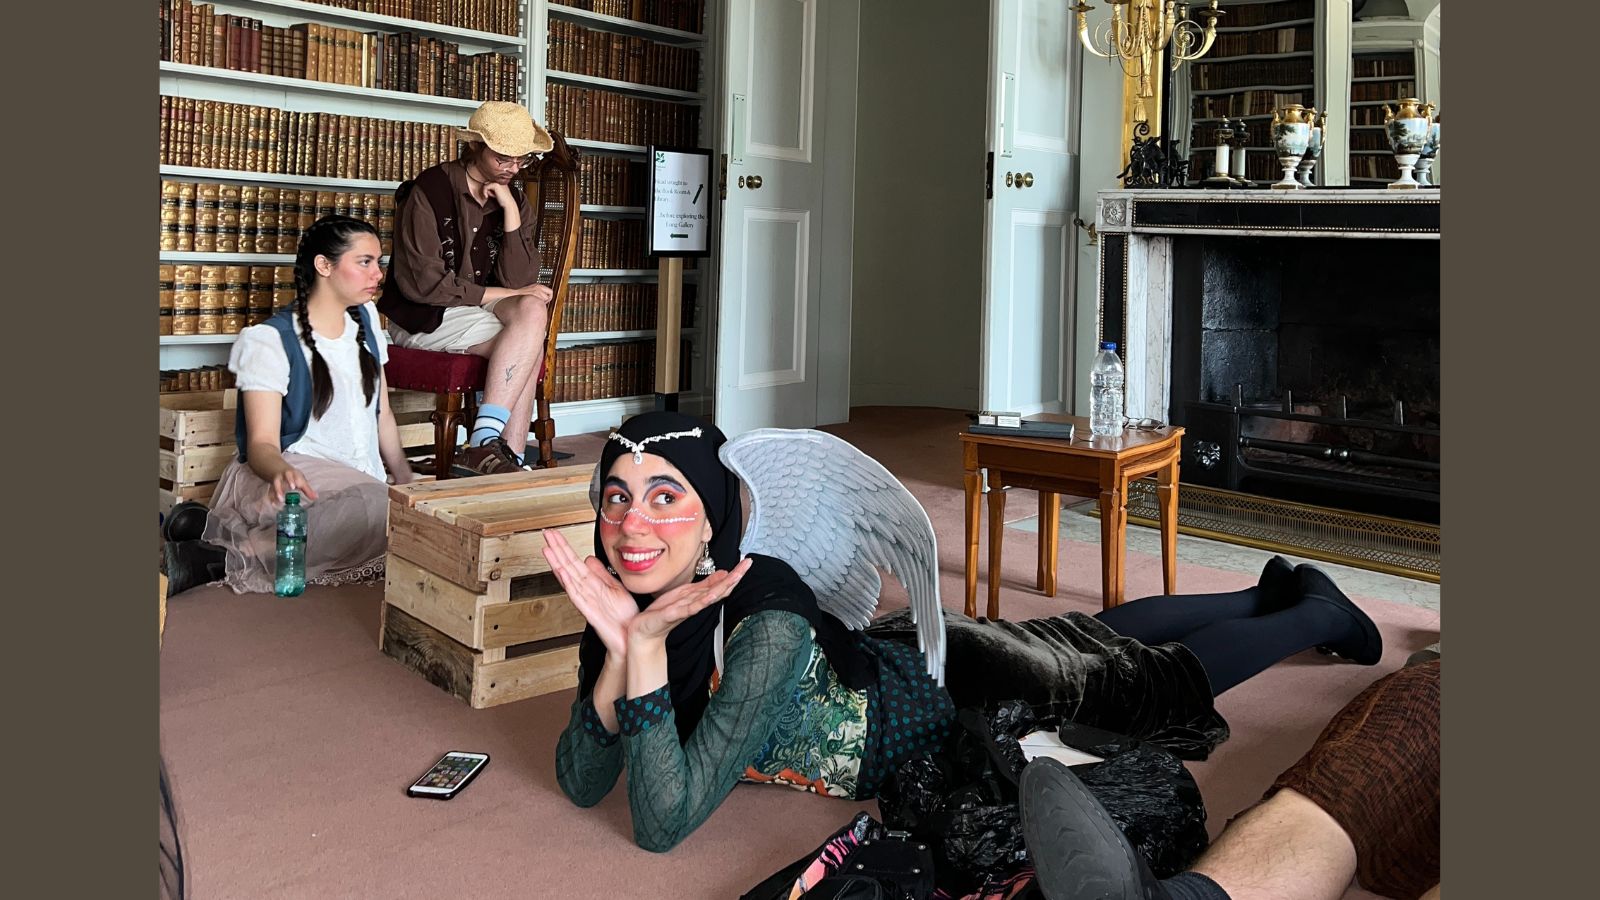 Students in costume relax while preparing for a performance of their play in a large stately home